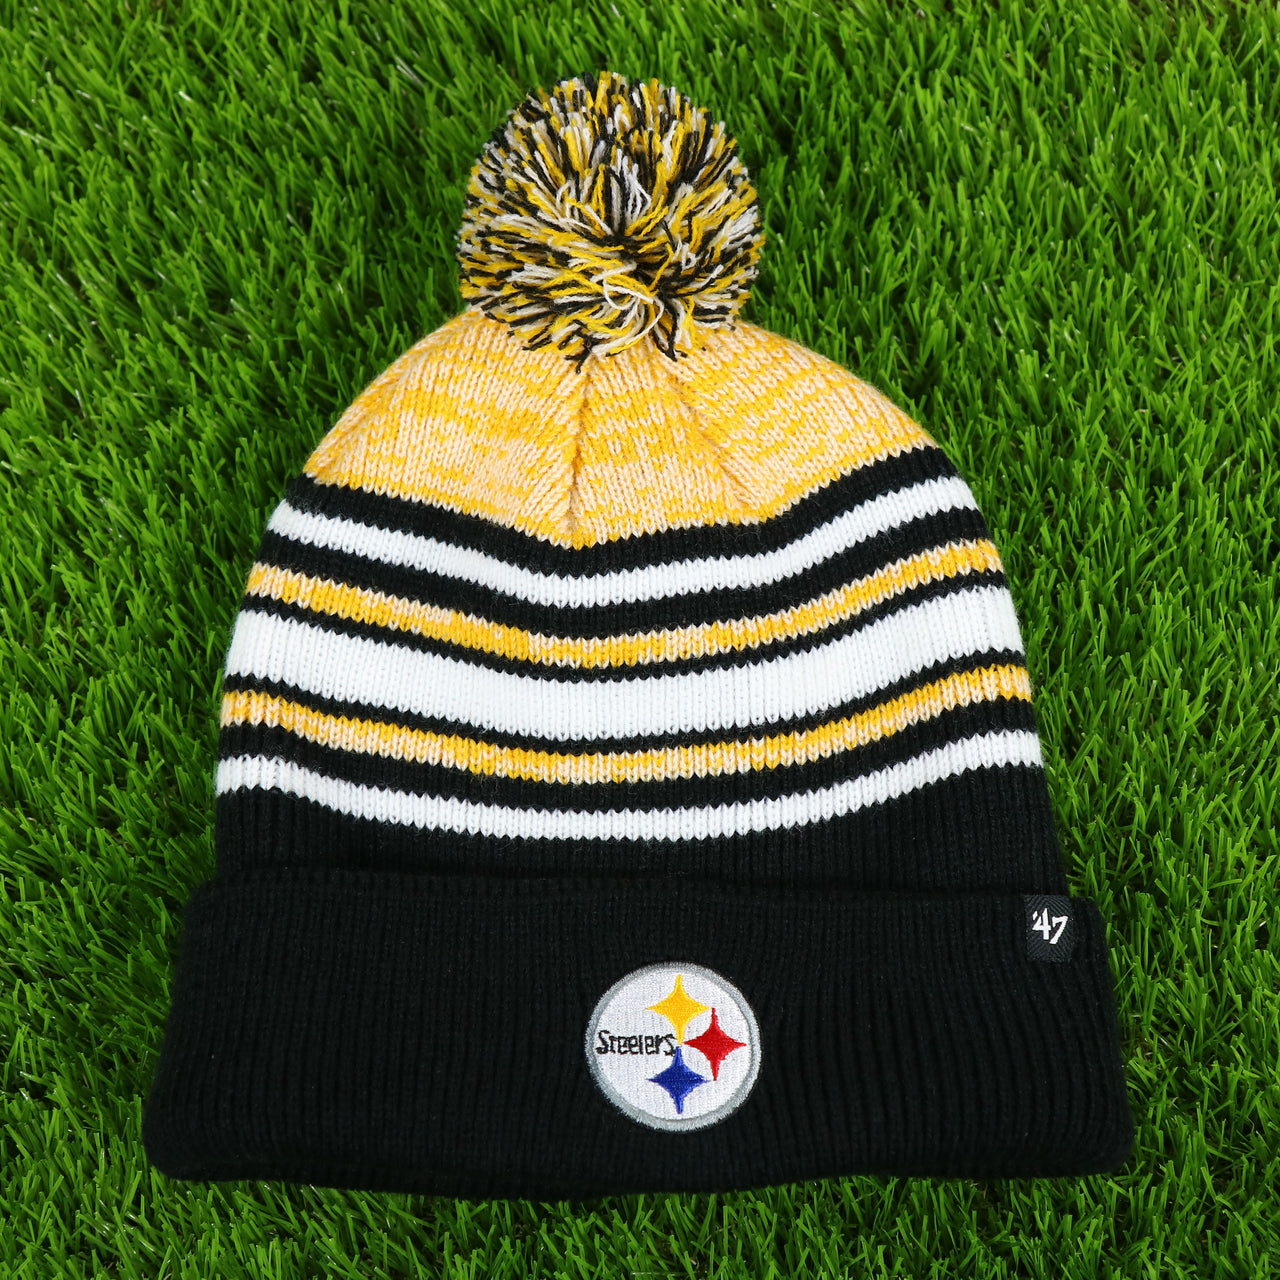 The Kid’s Pittsburgh Steelers Striped Pom Pom Winter Beanie | Black, Yellow, And White Beanie